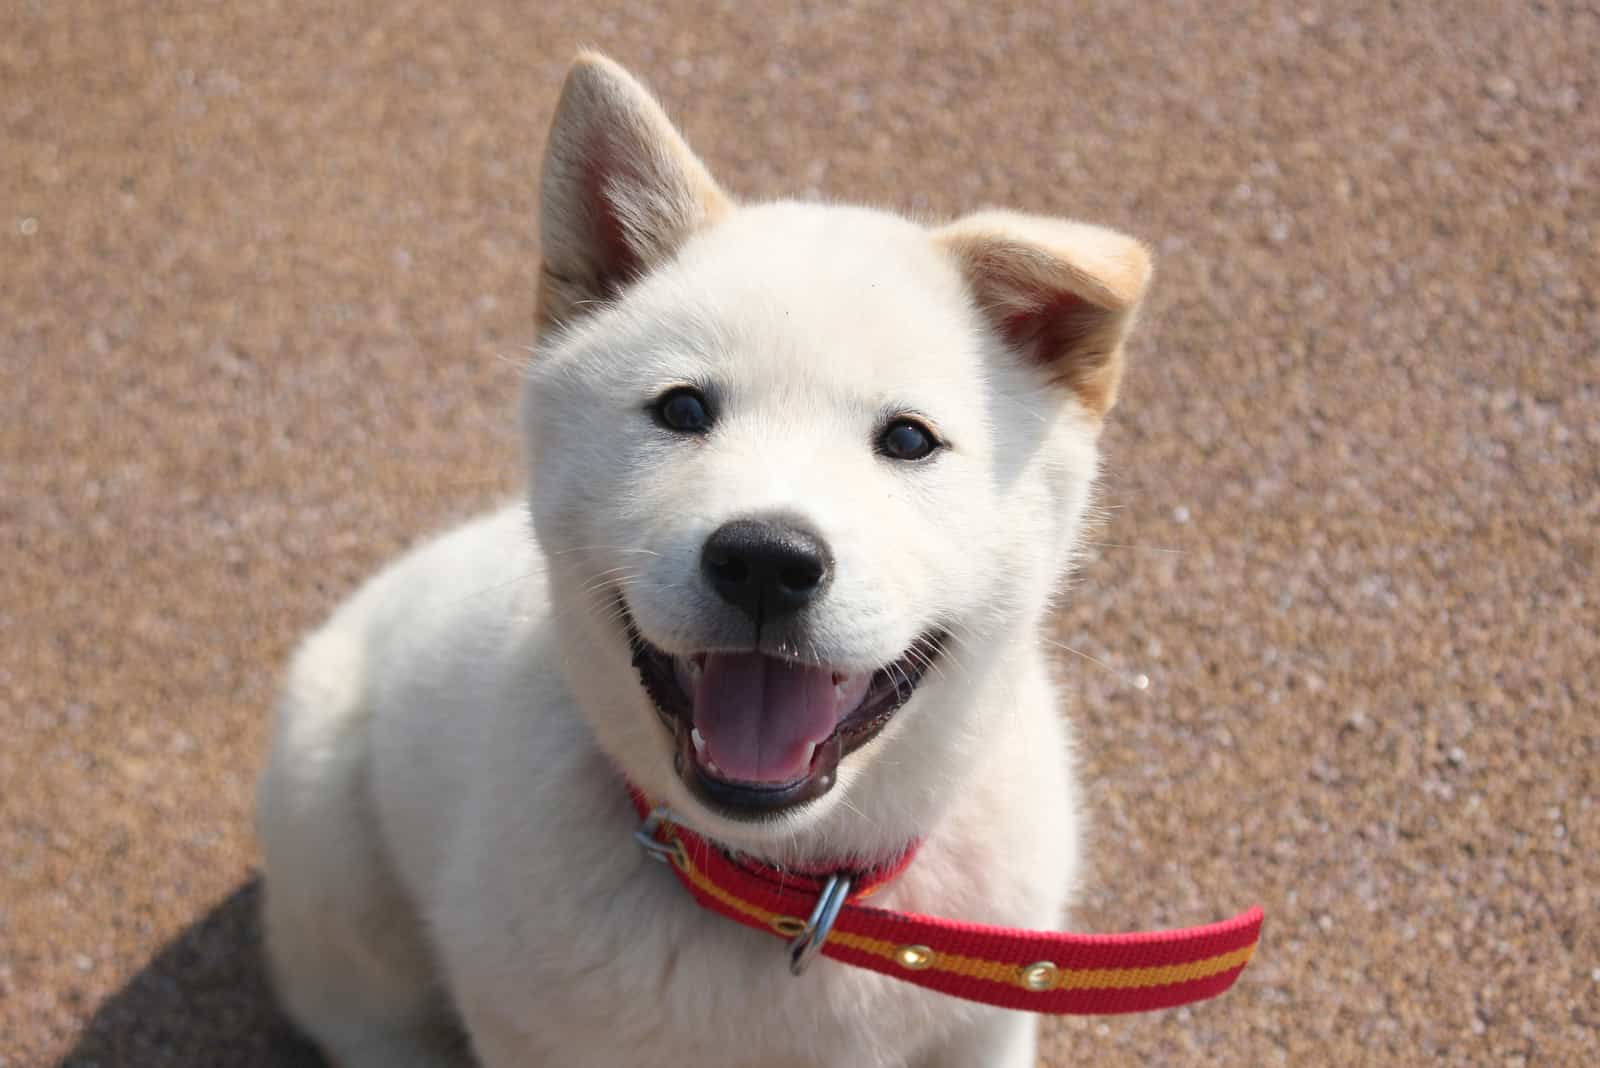 the jindo puppy sits and looks at the camera